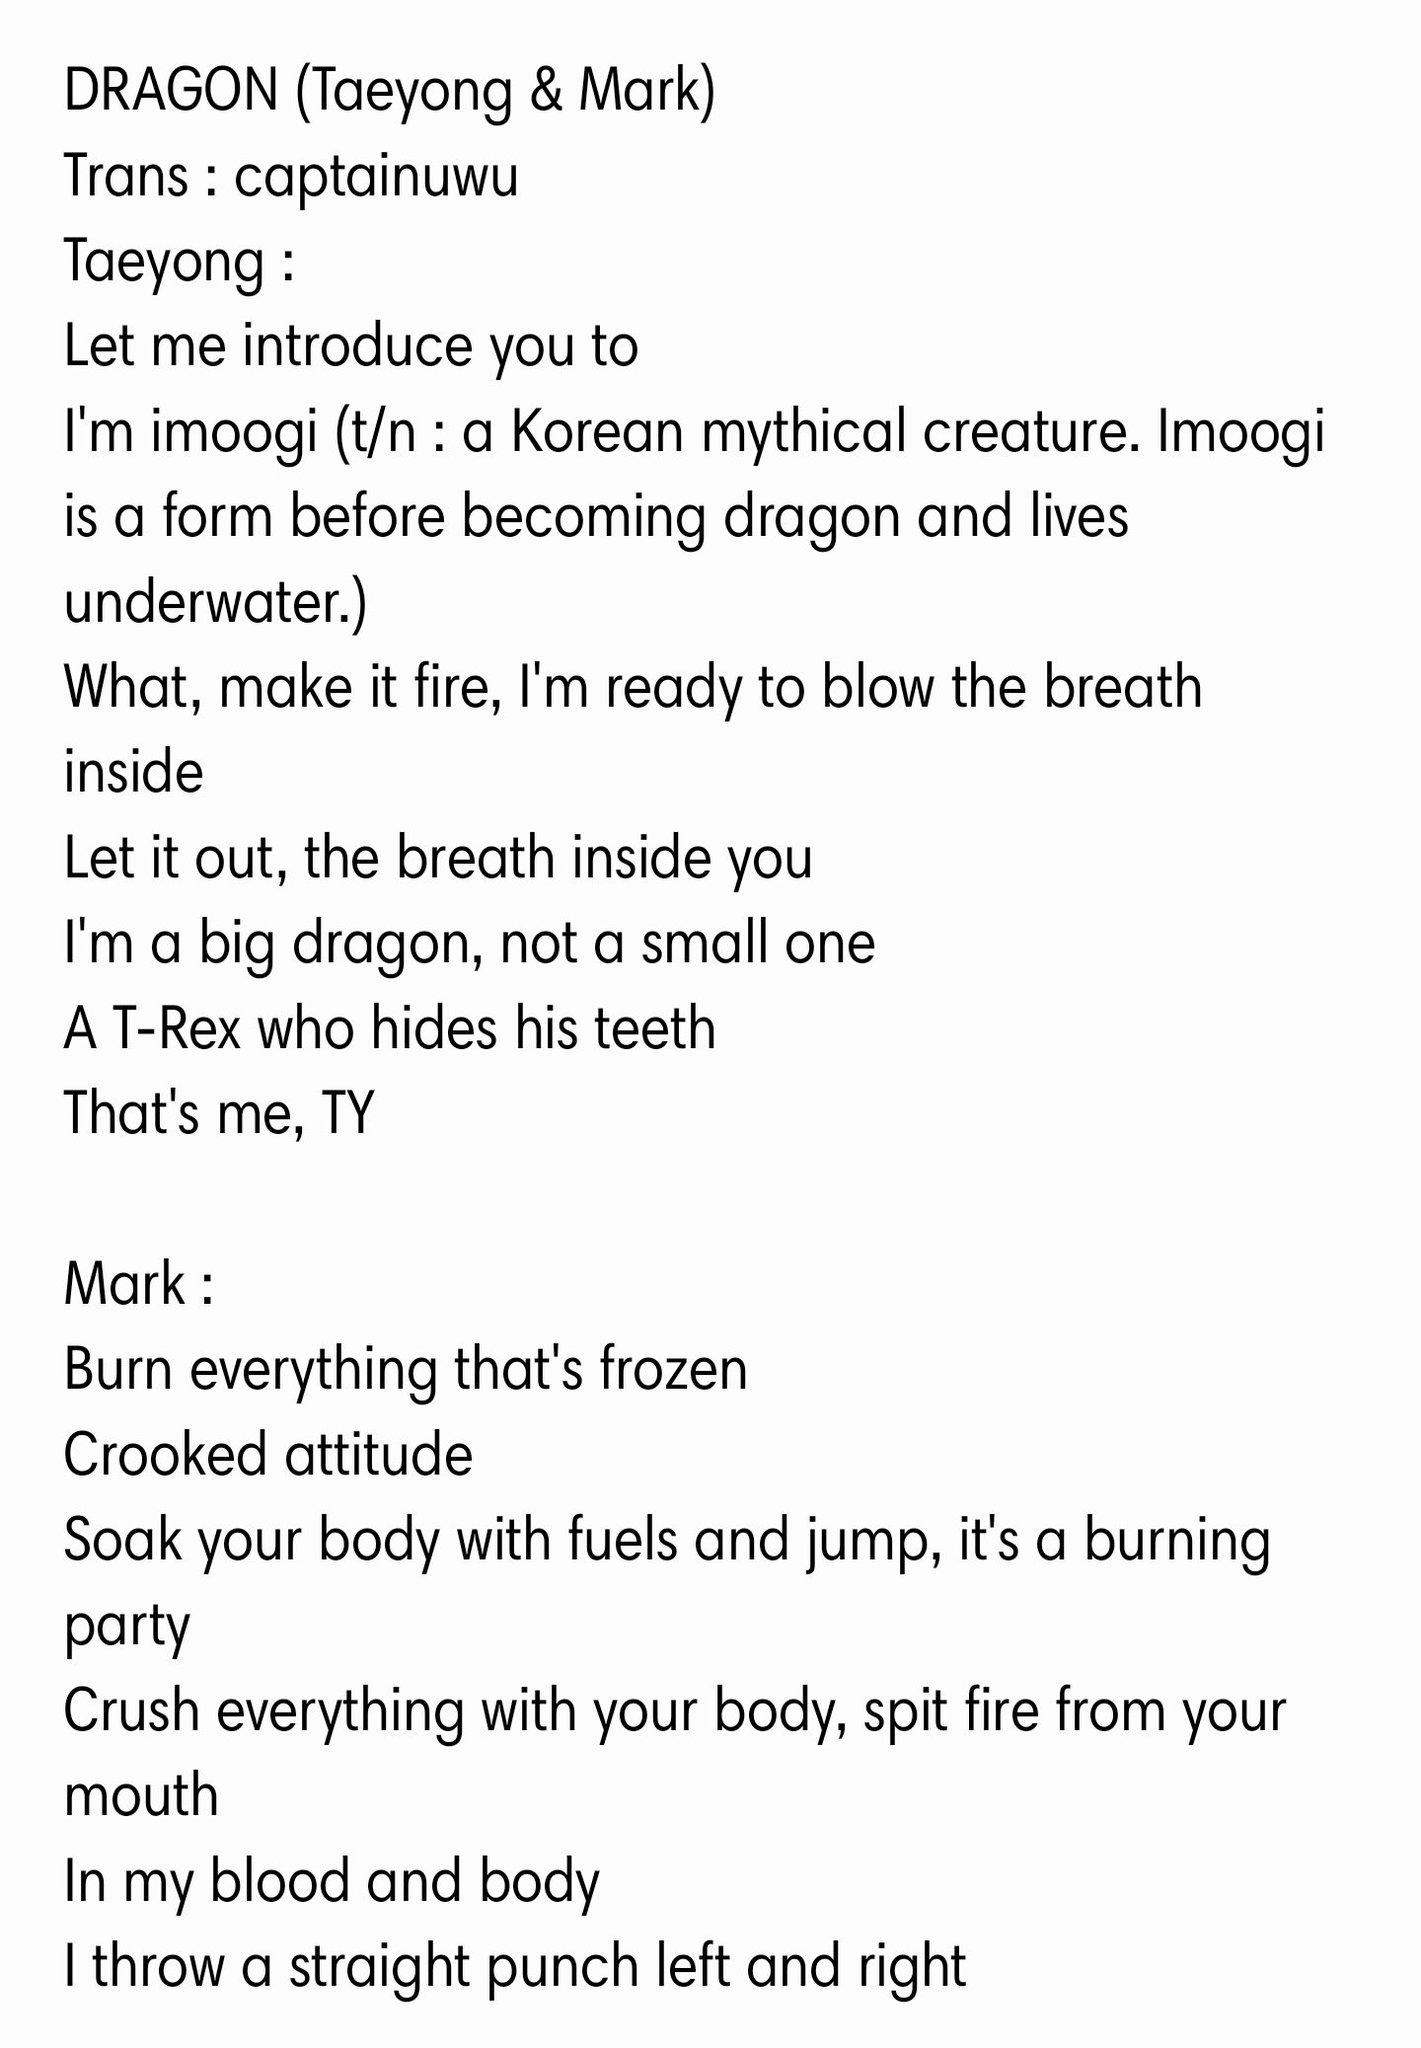 Dyva🌸 on X: FineㅡTaeyong Lyrics translation (Done by ears, sorry for  mistakes! I will revise it, there are things I couldn't hear well but this  is most of it) Your tear marks